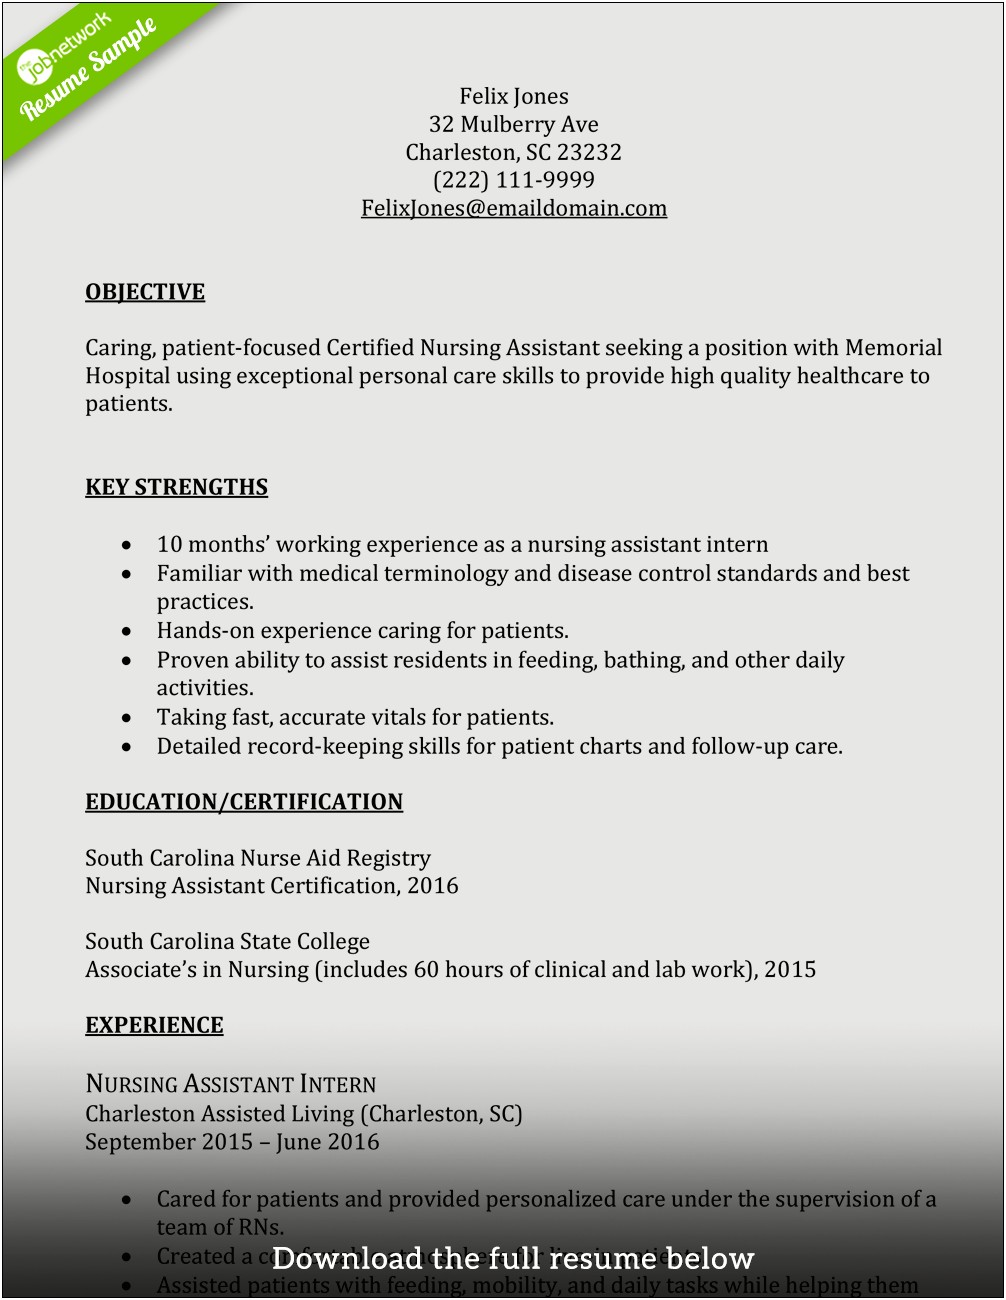 Resume Skills And Abilities Nursing Assistant